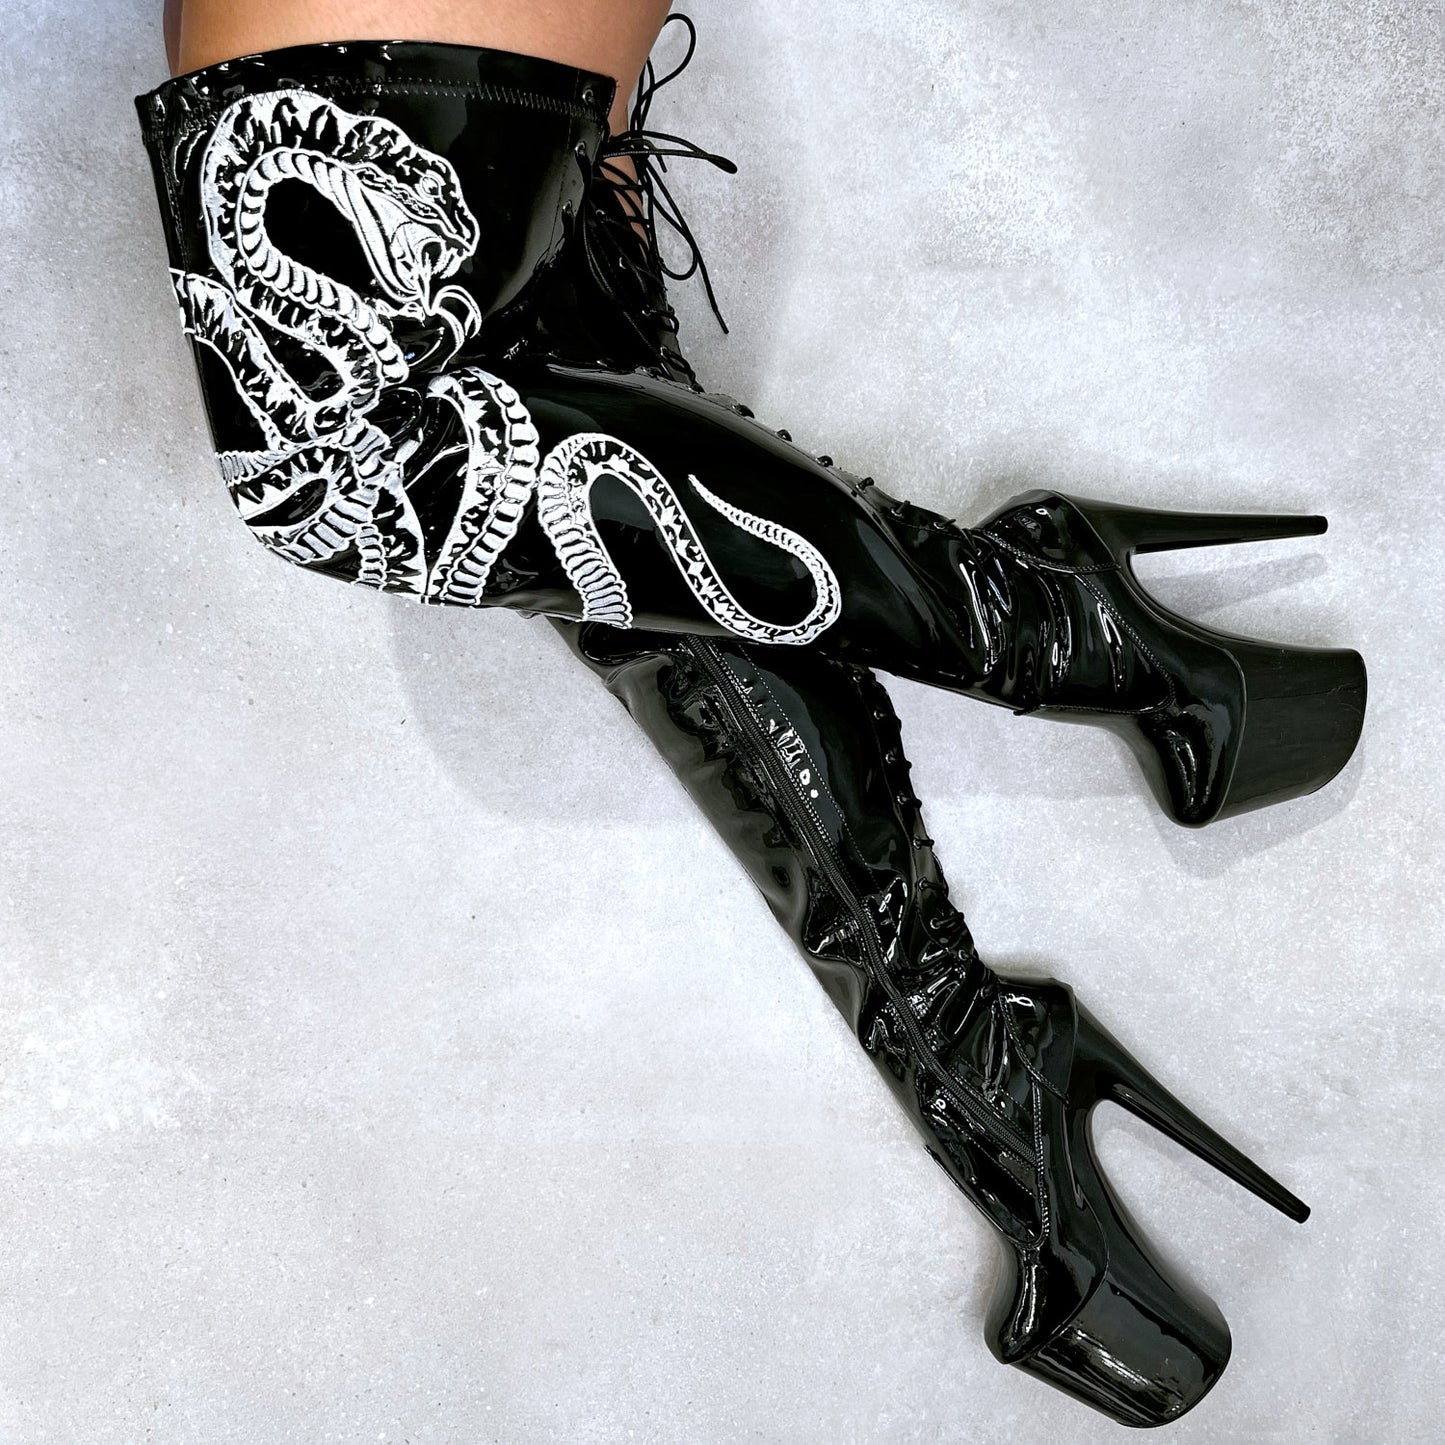 VIPER Boot Black with White Thicc Thigh High - 8INCH